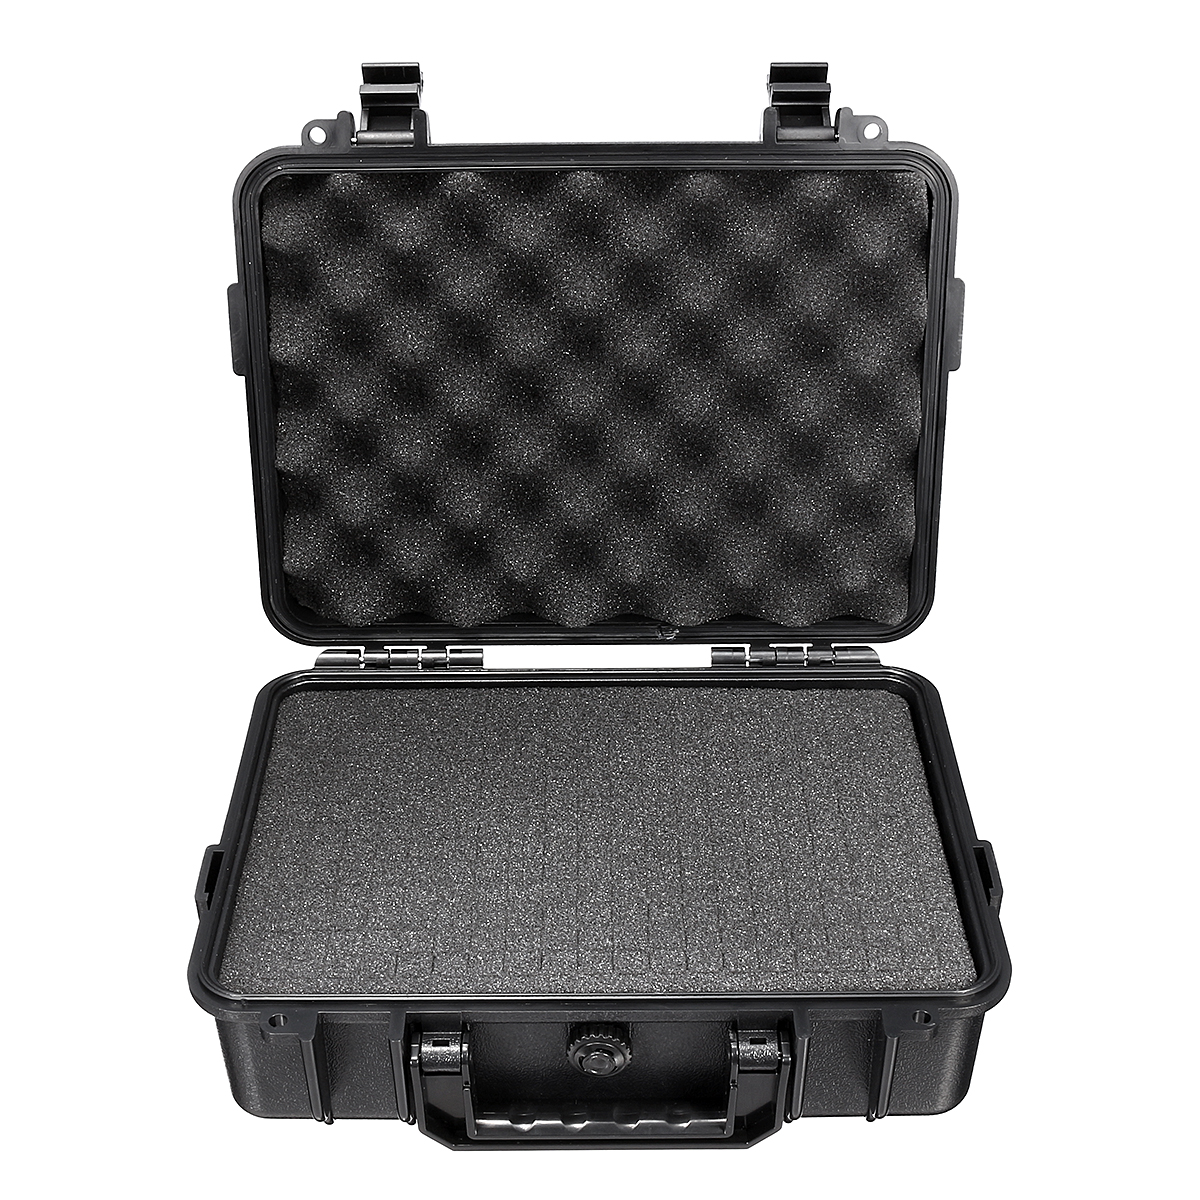 Waterproof-Hard-Carry-Tool-Case-Bag-Storage-Box-Camera-Photography-with-Sponge-18012050mm-1661734-3